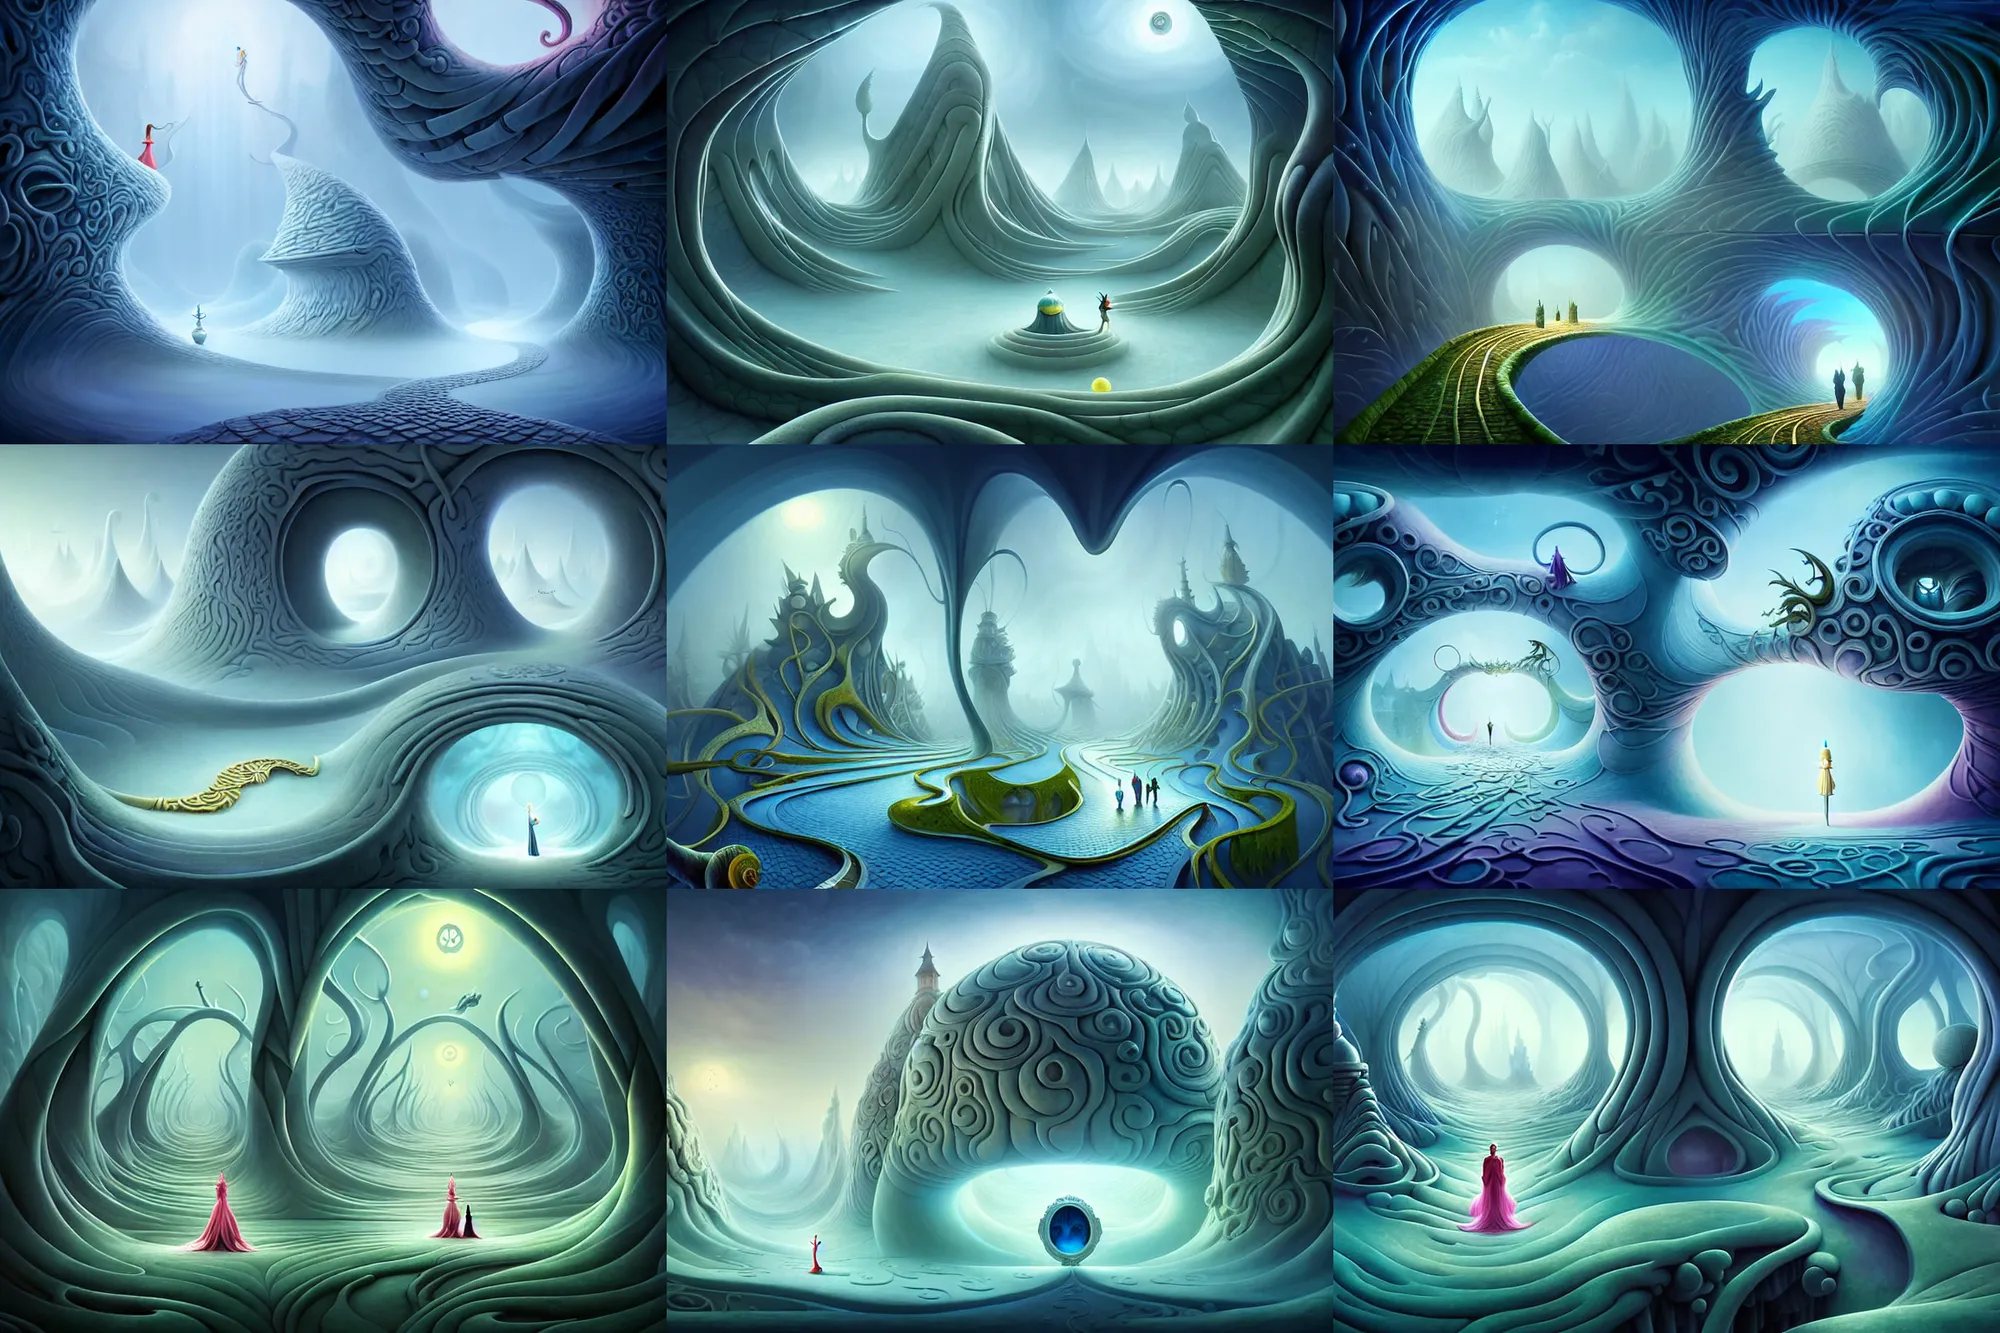 Prompt: a whimsical elite masterpiece mysterious science fantasy matte painting of a winding path through arctic dream worlds with surreal architecture designed by heironymous bosch, structures inspired by heironymous bosch's garden of earthly delights, surreal ice interiors by cyril rolando and natalie shau, insanely detailed and intricate, elegant, spirits of the wind